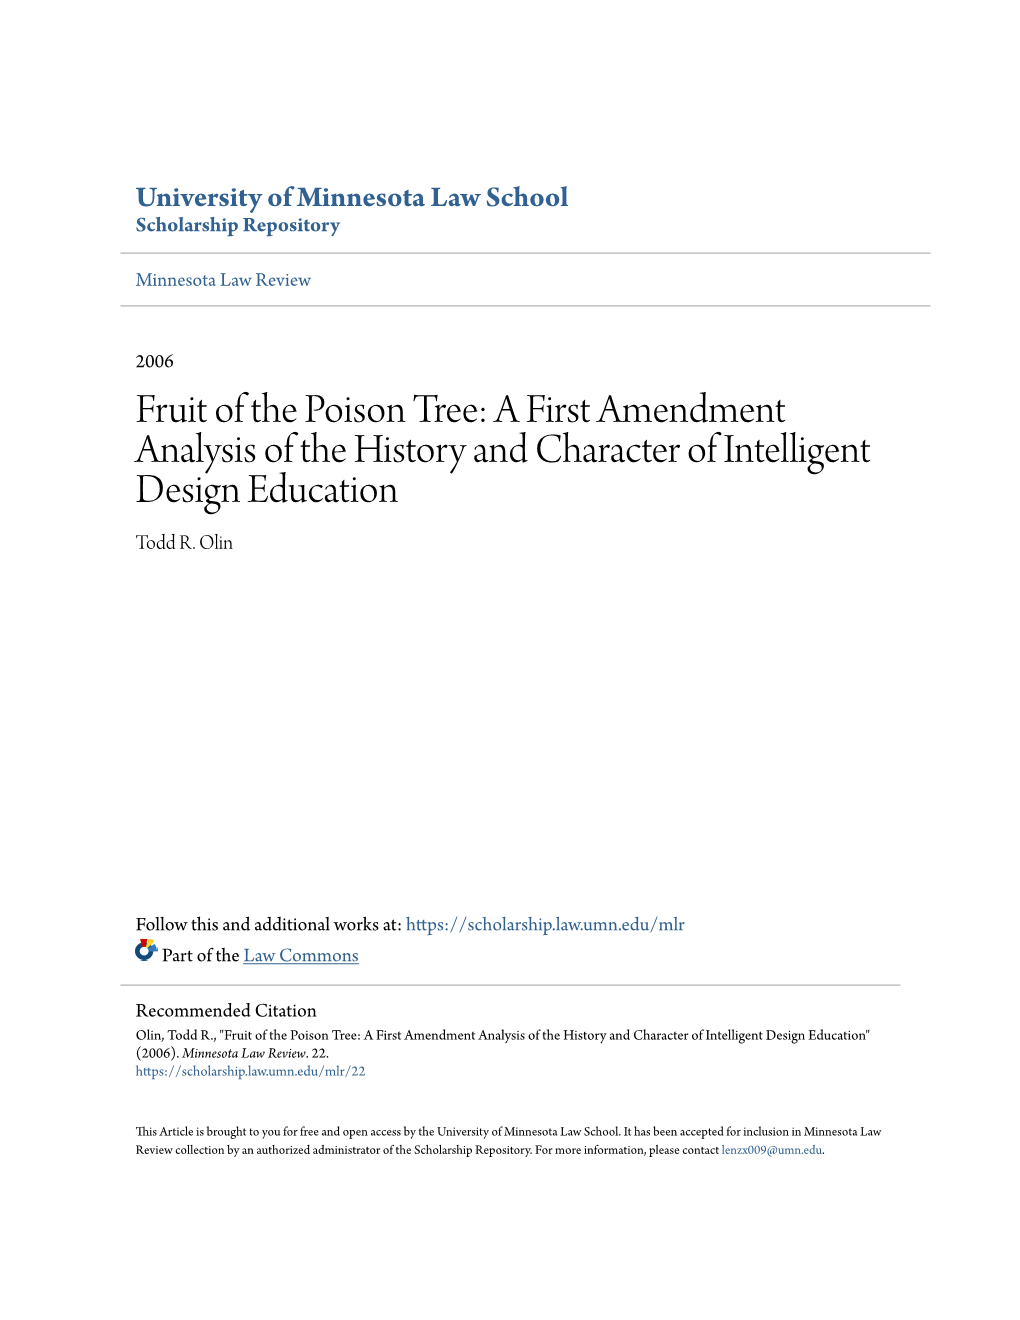 Fruit of the Poison Tree: a First Amendment Analysis of the History and Character of Intelligent Design Education Todd R